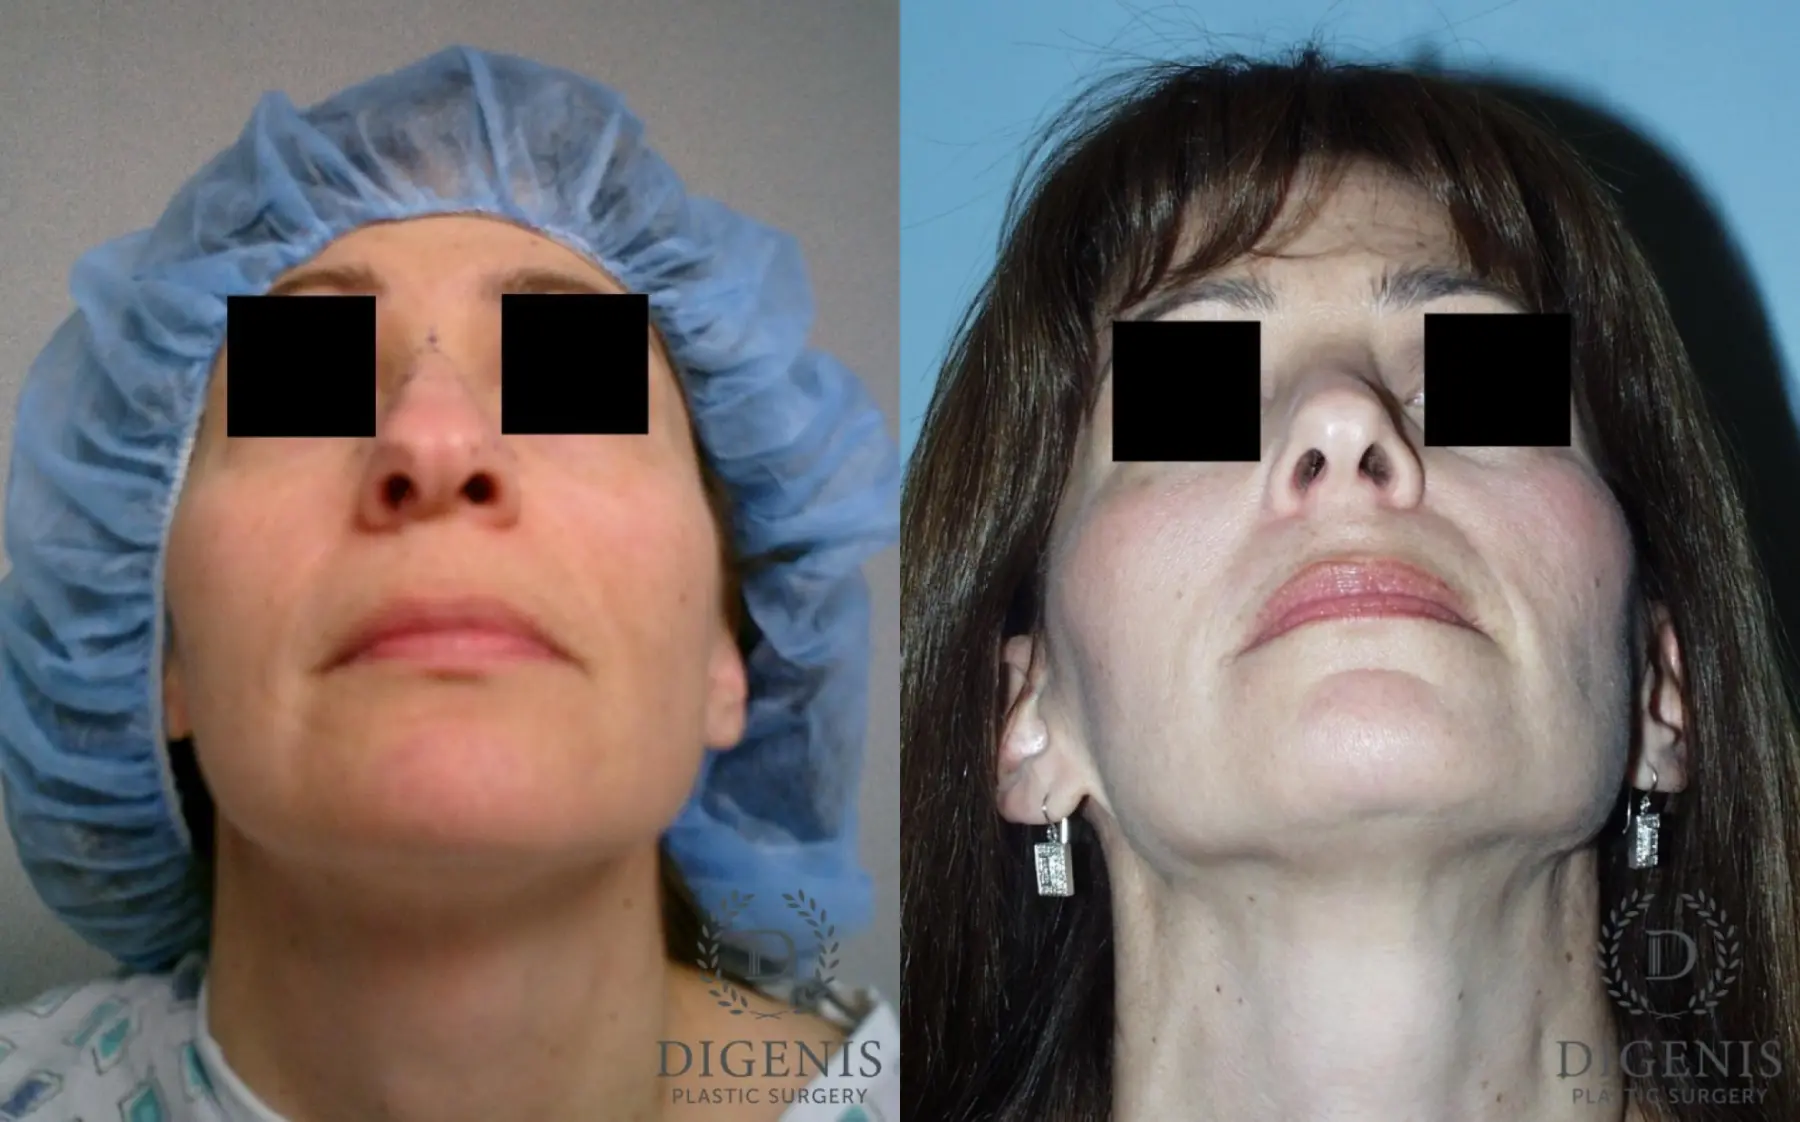 Rhinoplasty: Patient 5 - Before and After 6